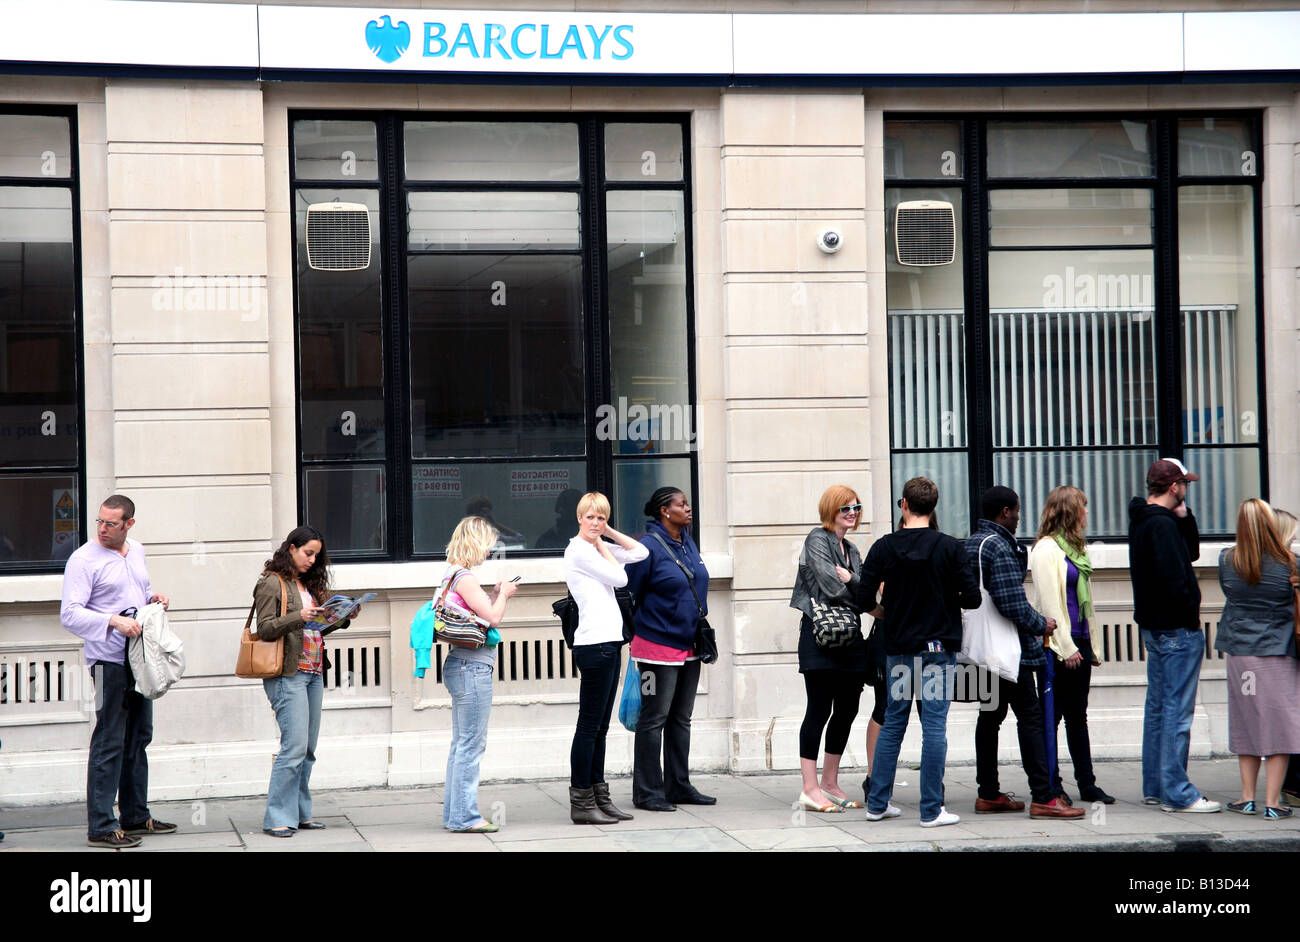 Customers queuing for cash machine in London street Stock Photo